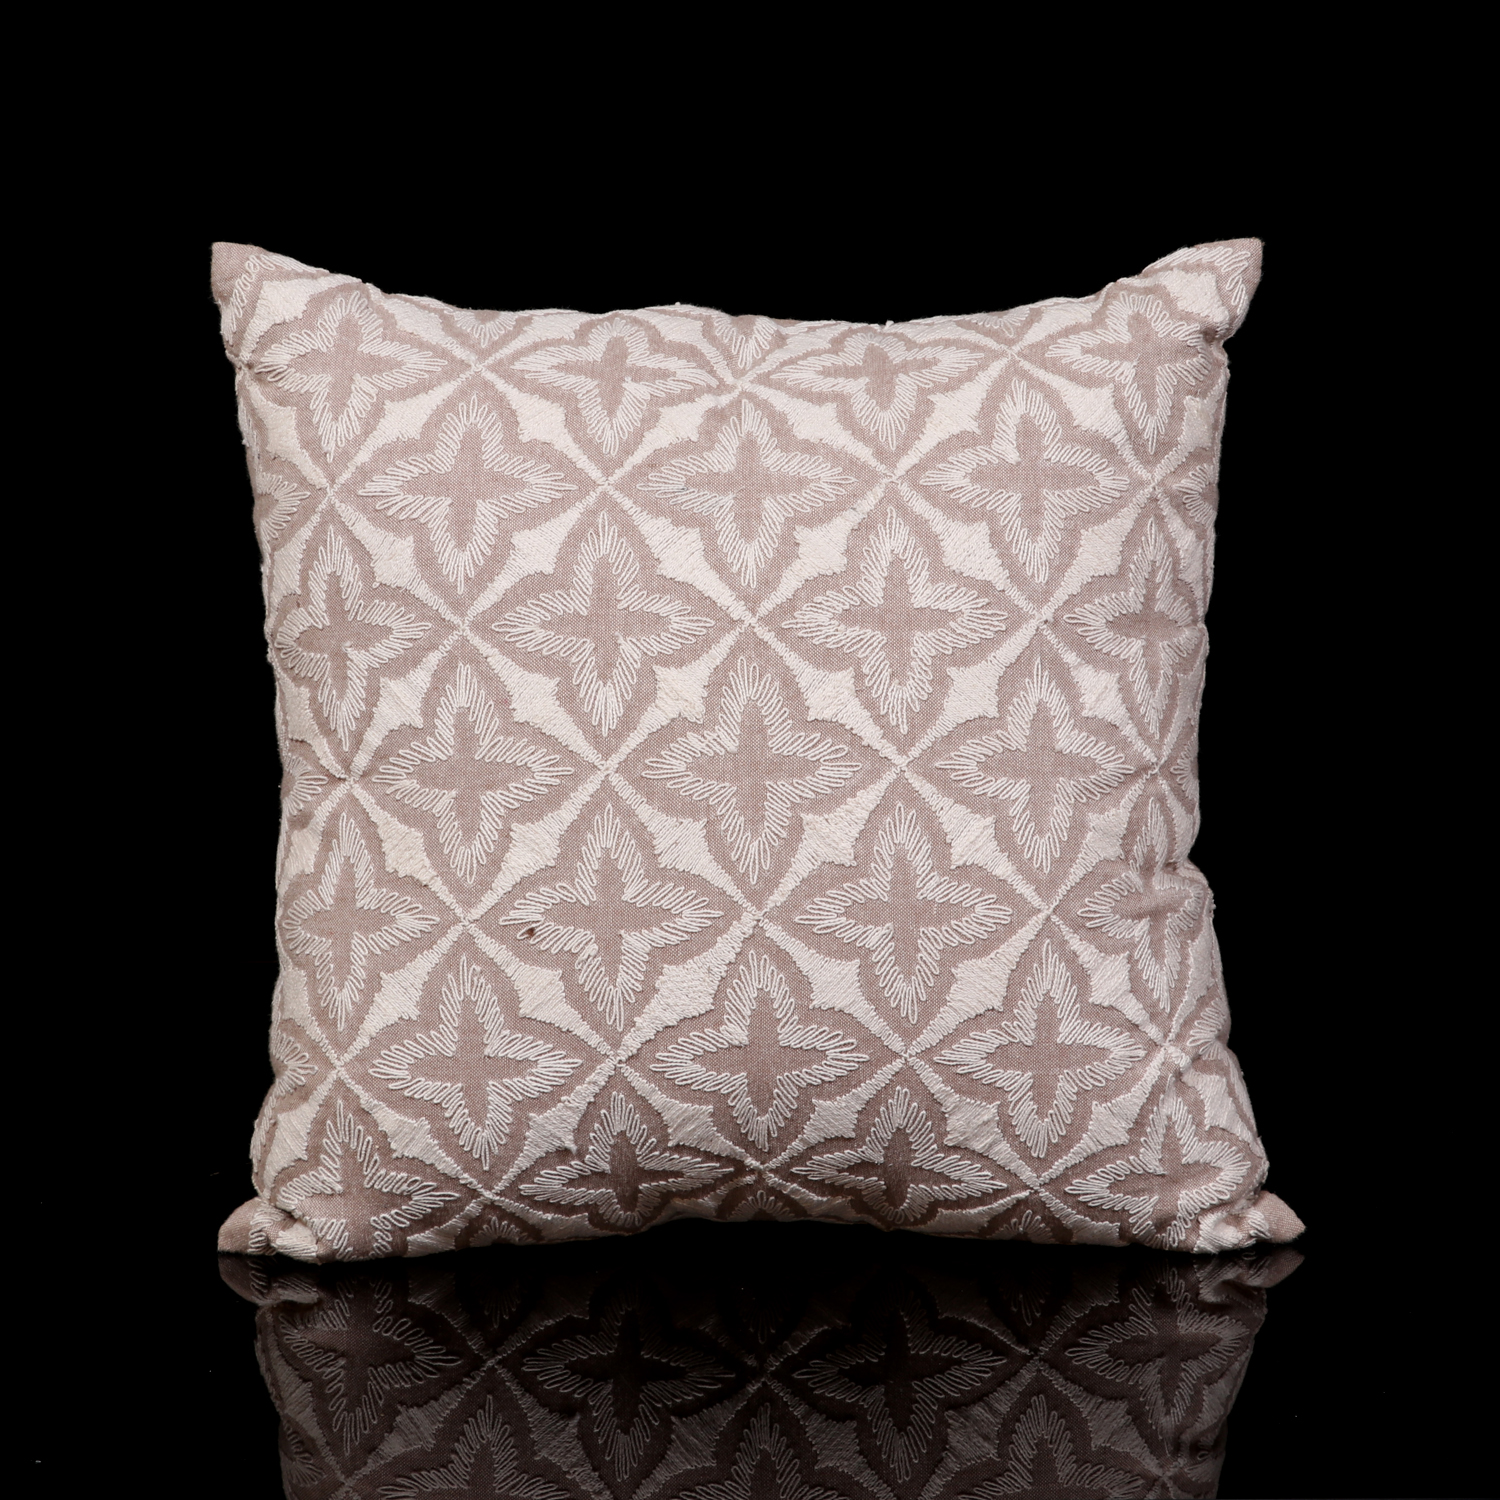 EMBROIDERED TRADITIONAL GRILLED PATTERN PILLOW